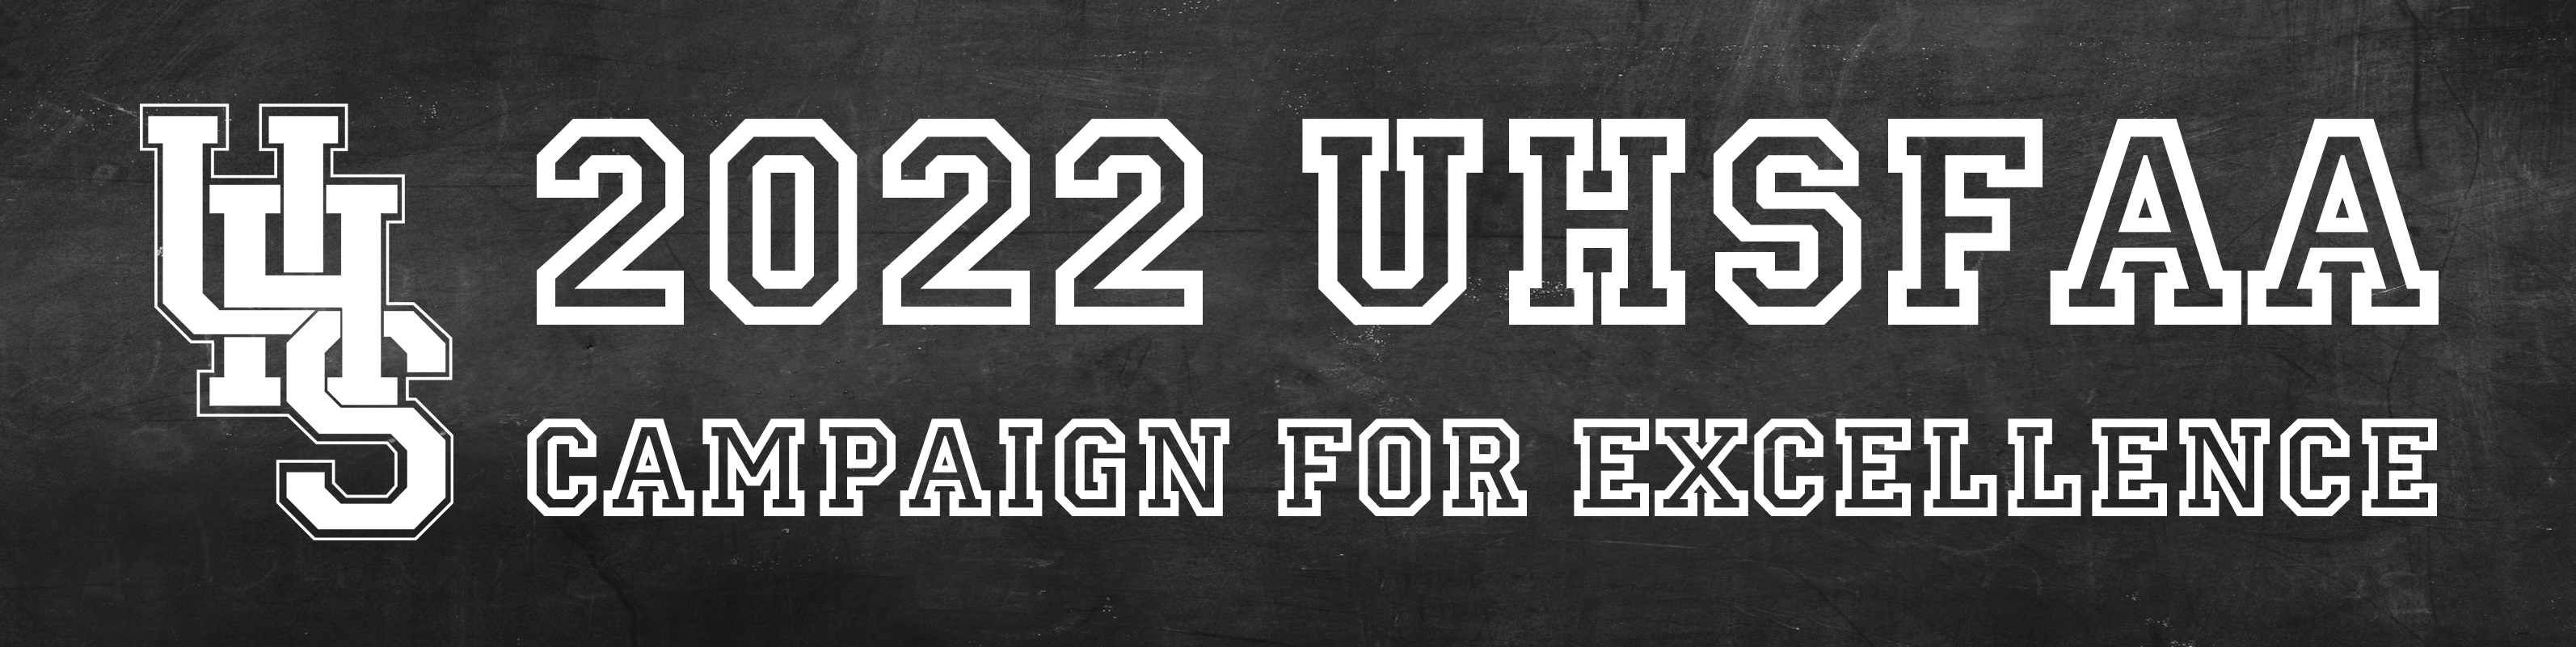 2021 UHSFAA Campaign Banner